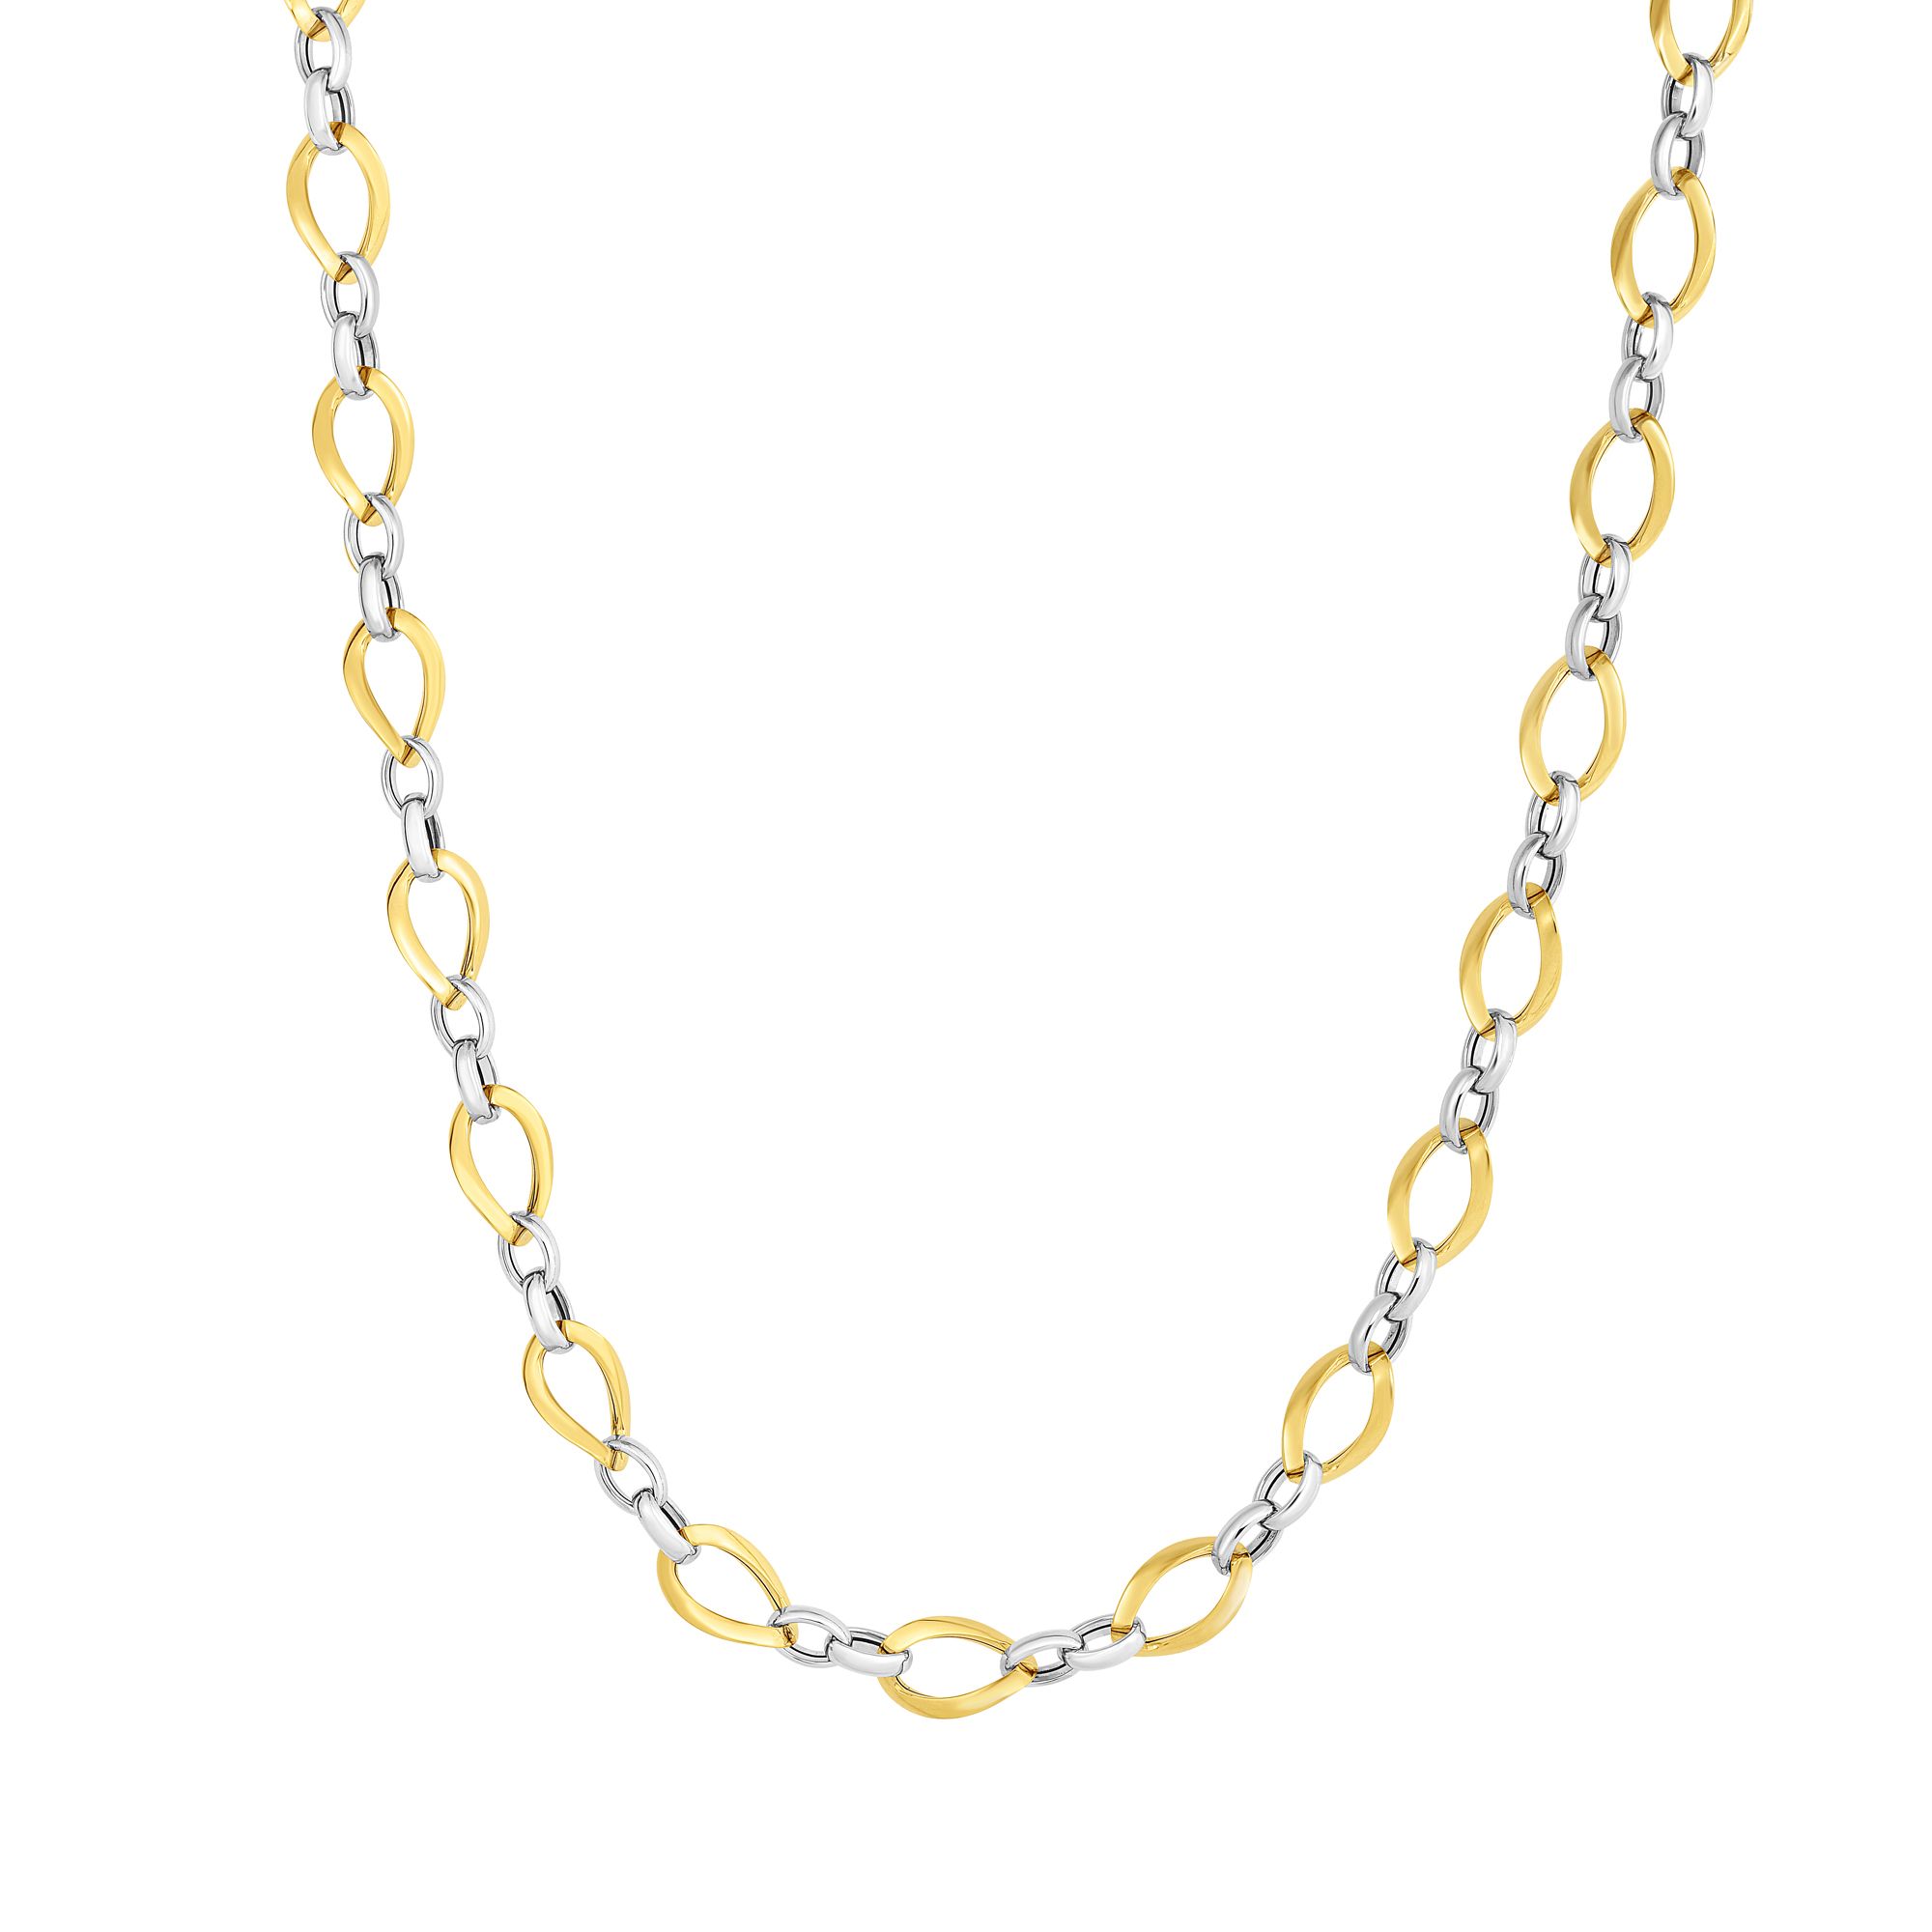 14kt Gold 18 inches Yellow+White Finish 7.4mm Shiny Twisted Oval Tube Link Necklace with Lobster Clasp